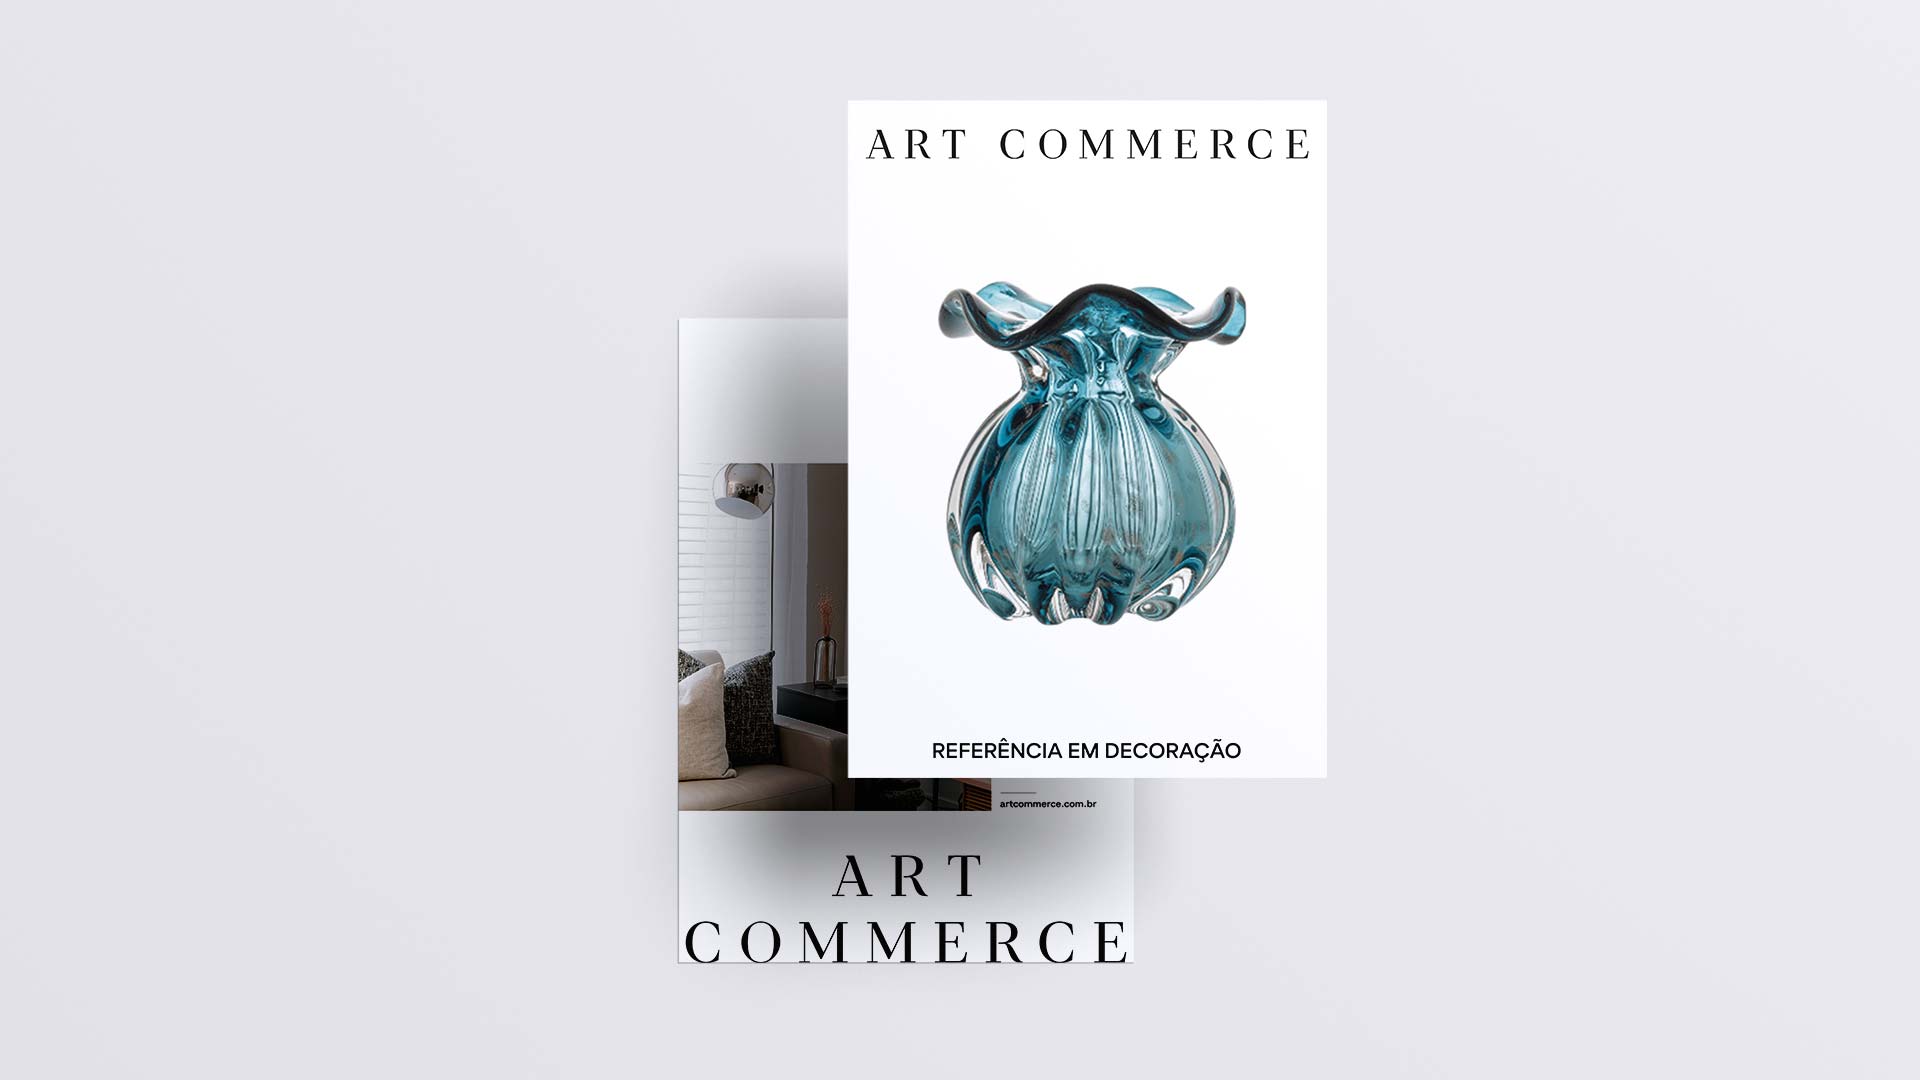 Art Commerce Branding and Collaterals - Ave Design